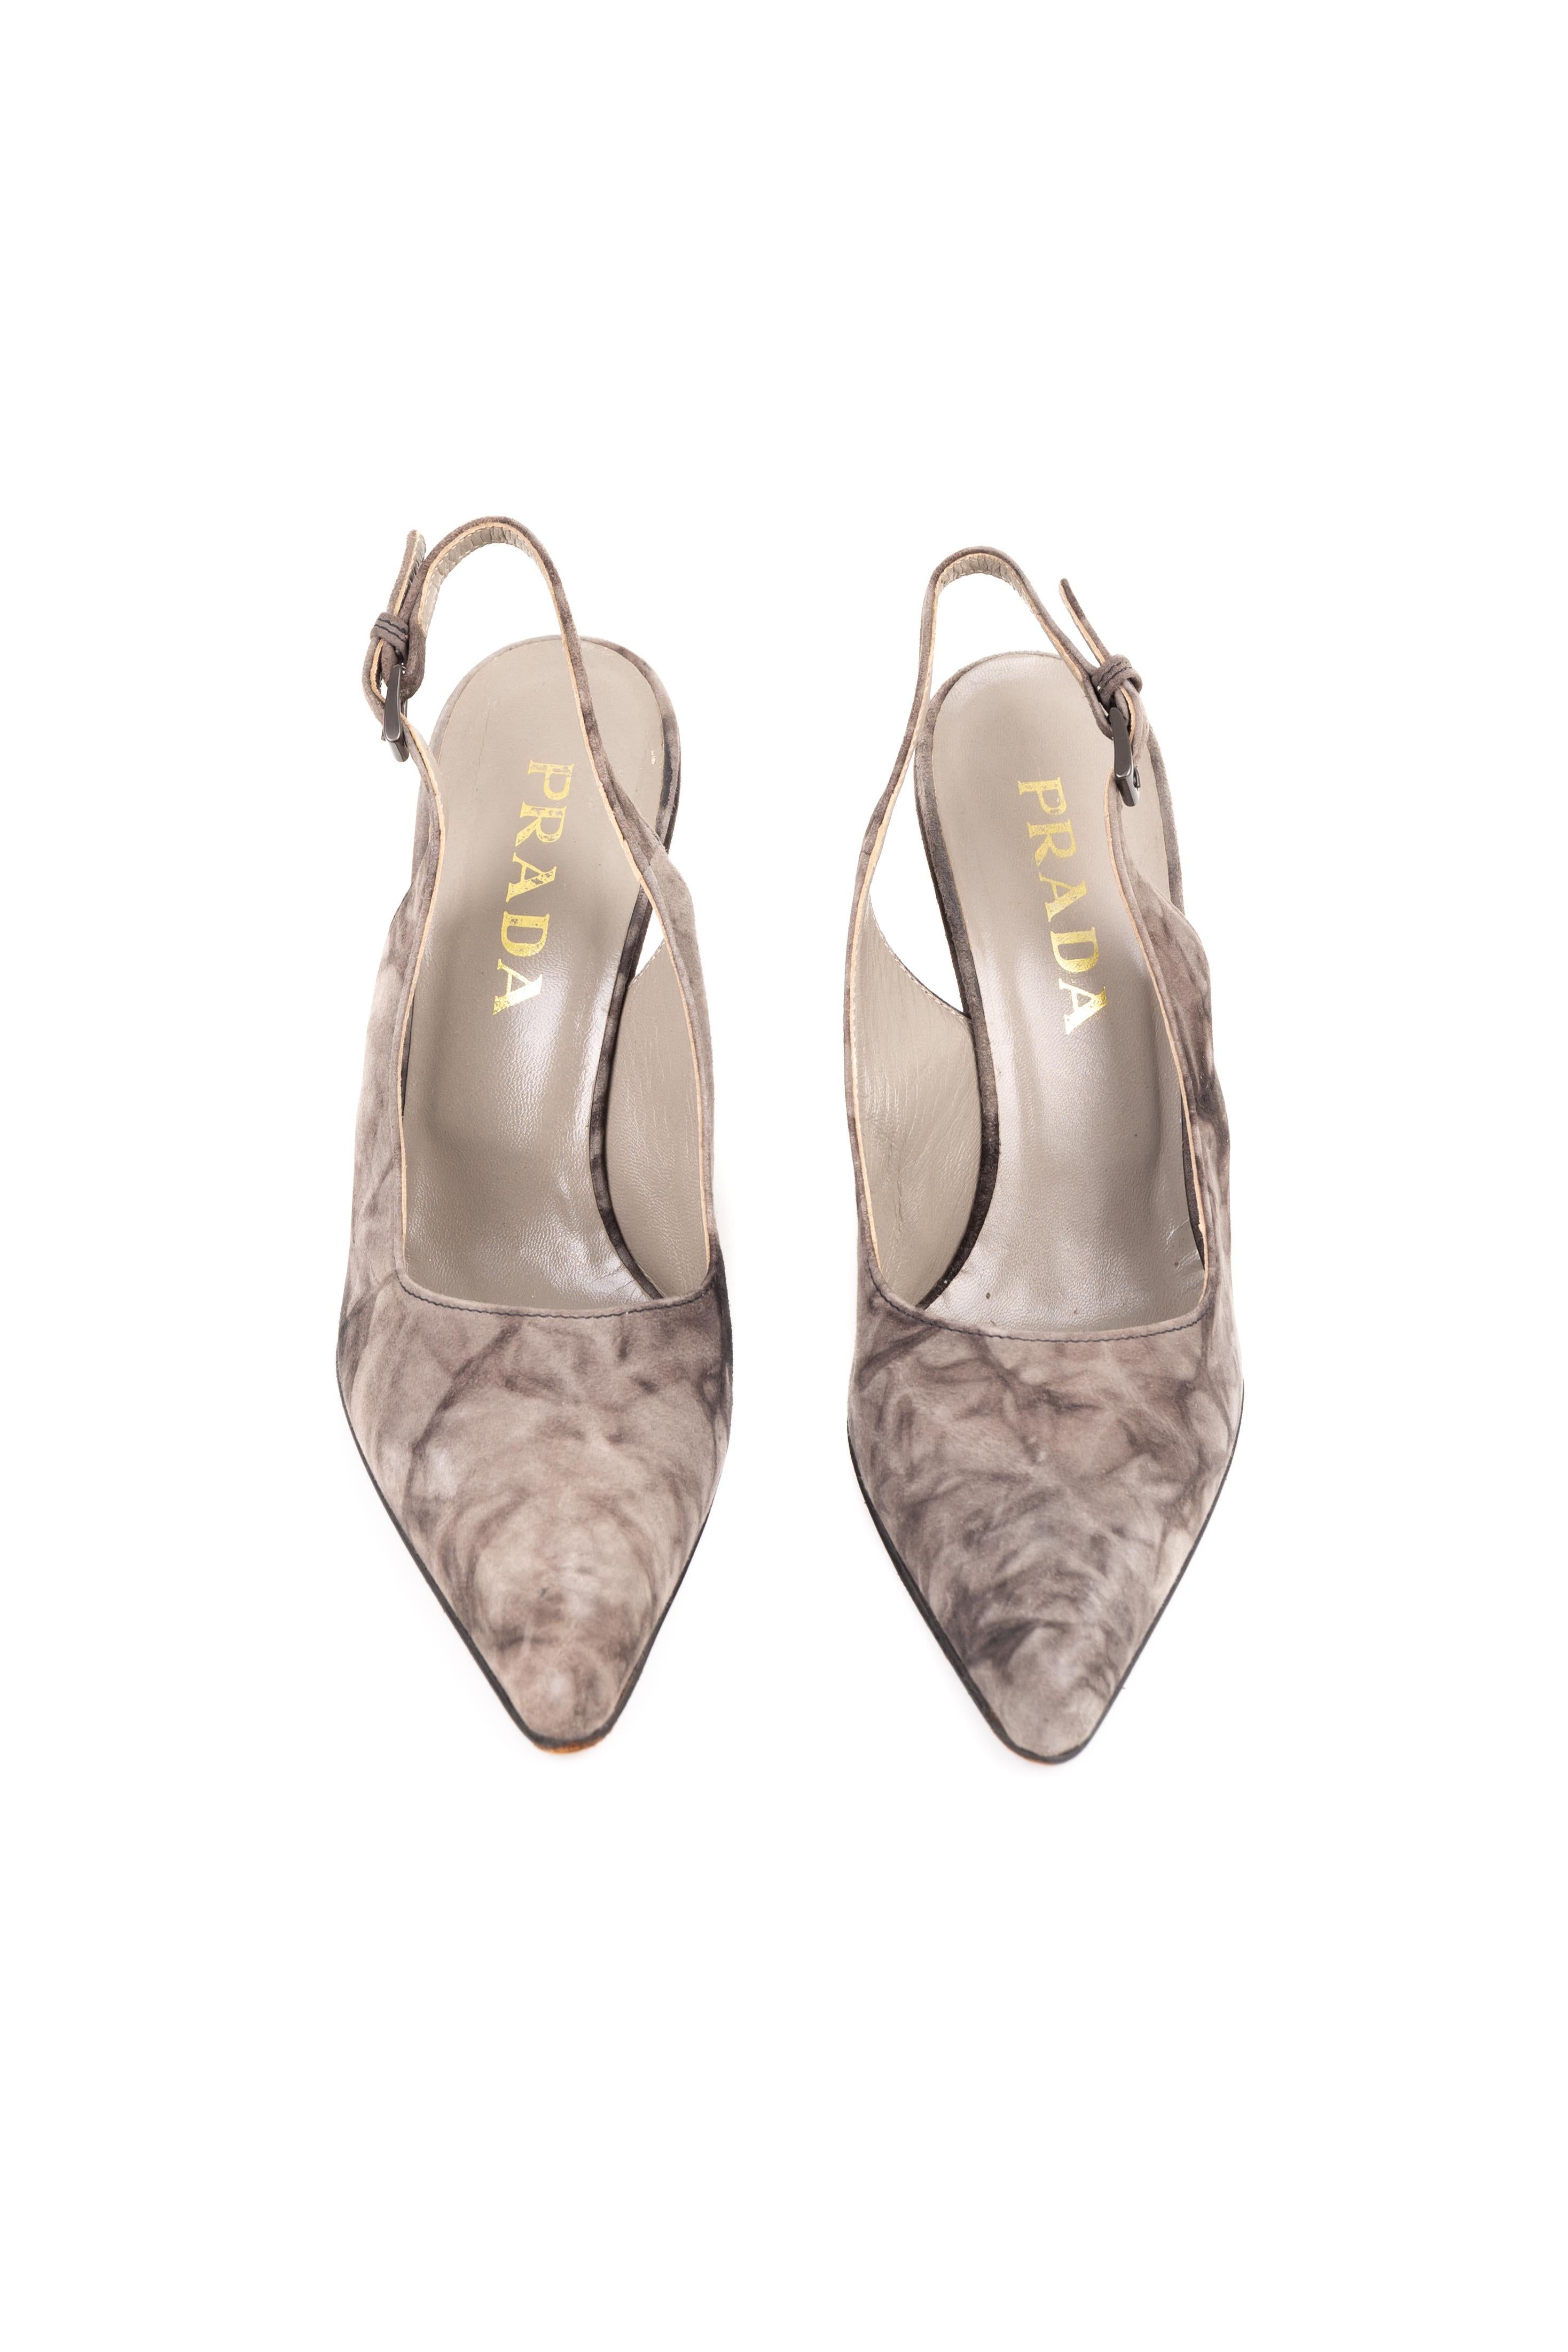 - Prada by Miuccia Prada
- Sold by Gold Palms Vintage
- Fall Winter 1997 collection
- Grey suede wedge heels
- Marble effect motif
- Size: 37,5 / US 7 / UK 5